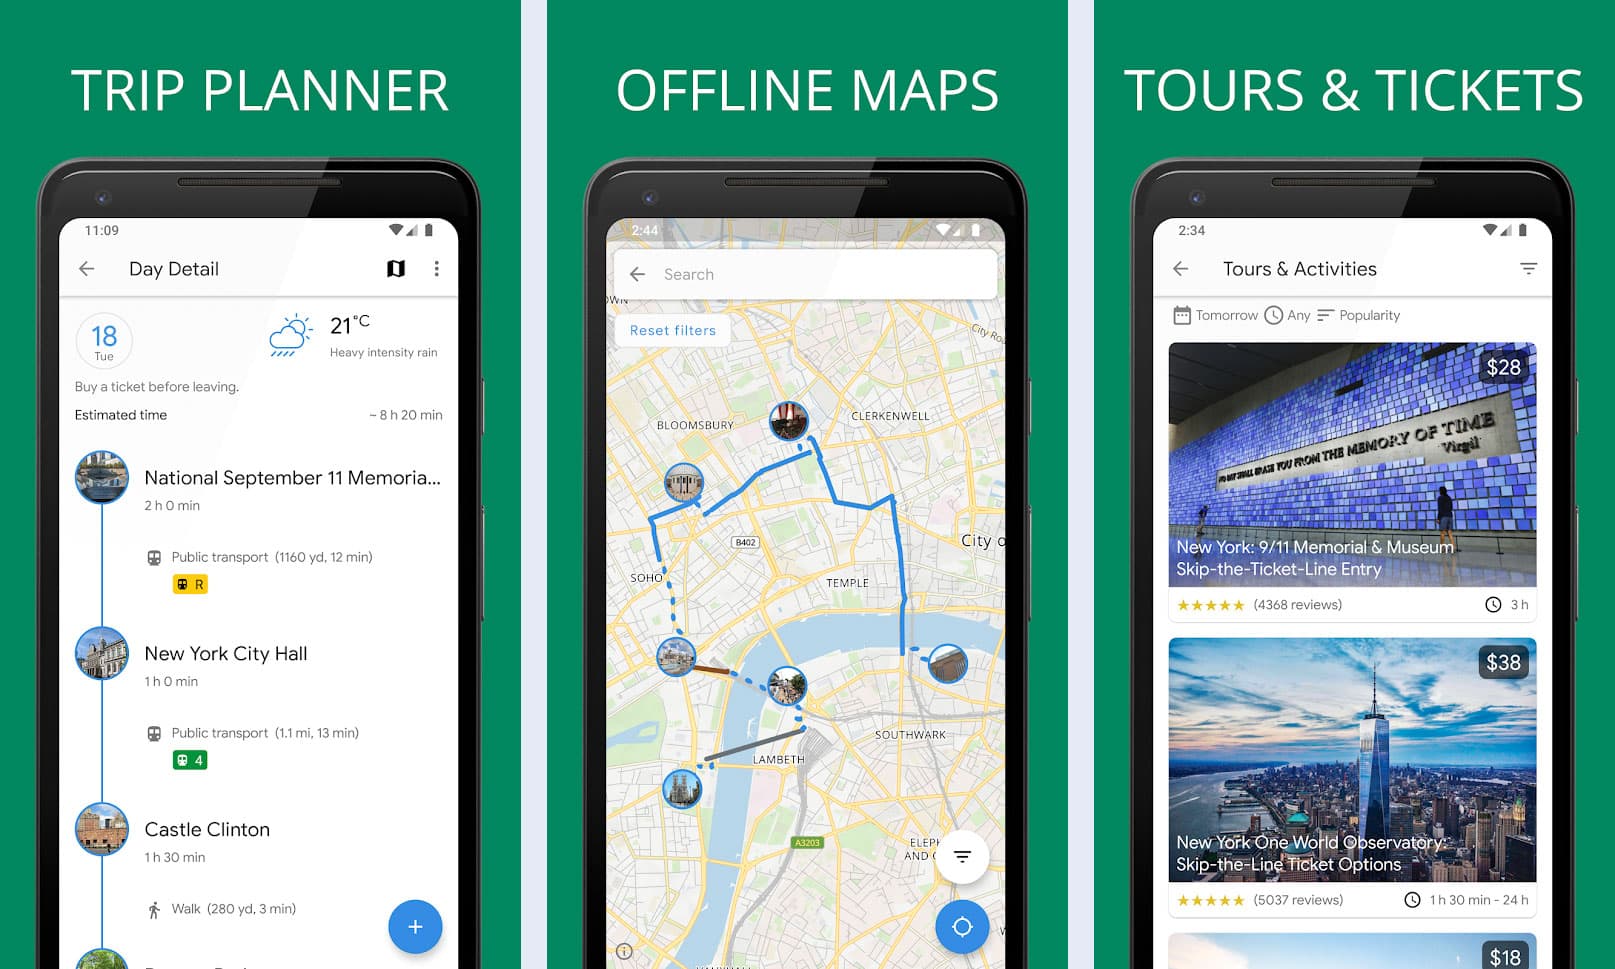 The image shows a set of three screenshots from a travel planning app. The first image shows a list of estimated travel times to various destinations, the second image shows a map with various points of interest, and the third image shows a list of tours and activities.